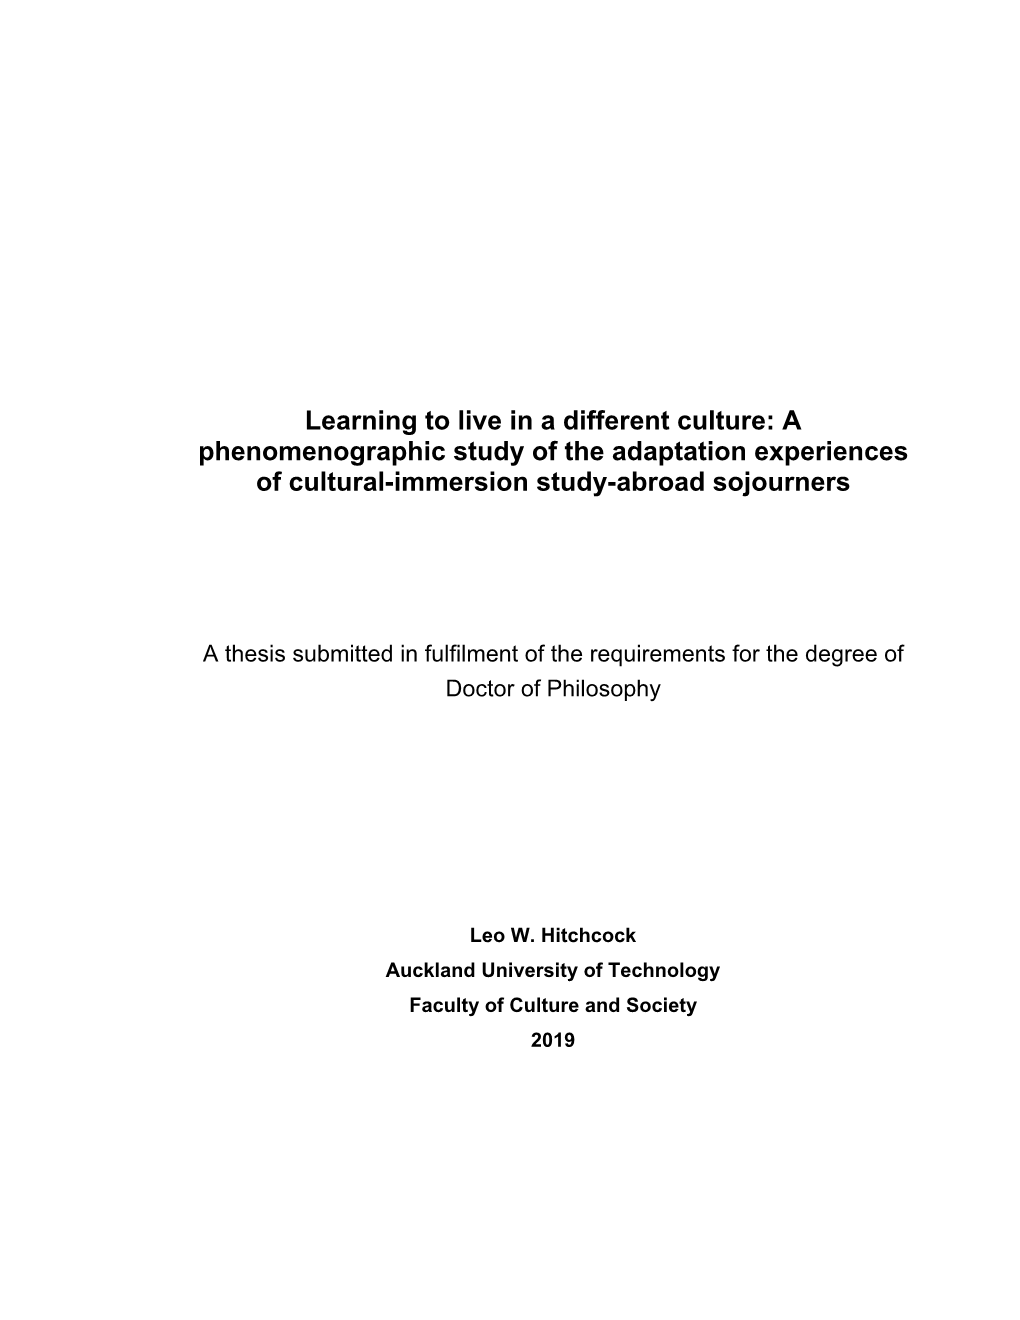 Learning to Live in a Different Culture: a Phenomenographic Study of the Adaptation Experiences of Cultural-Immersion Study-Abroad Sojourners